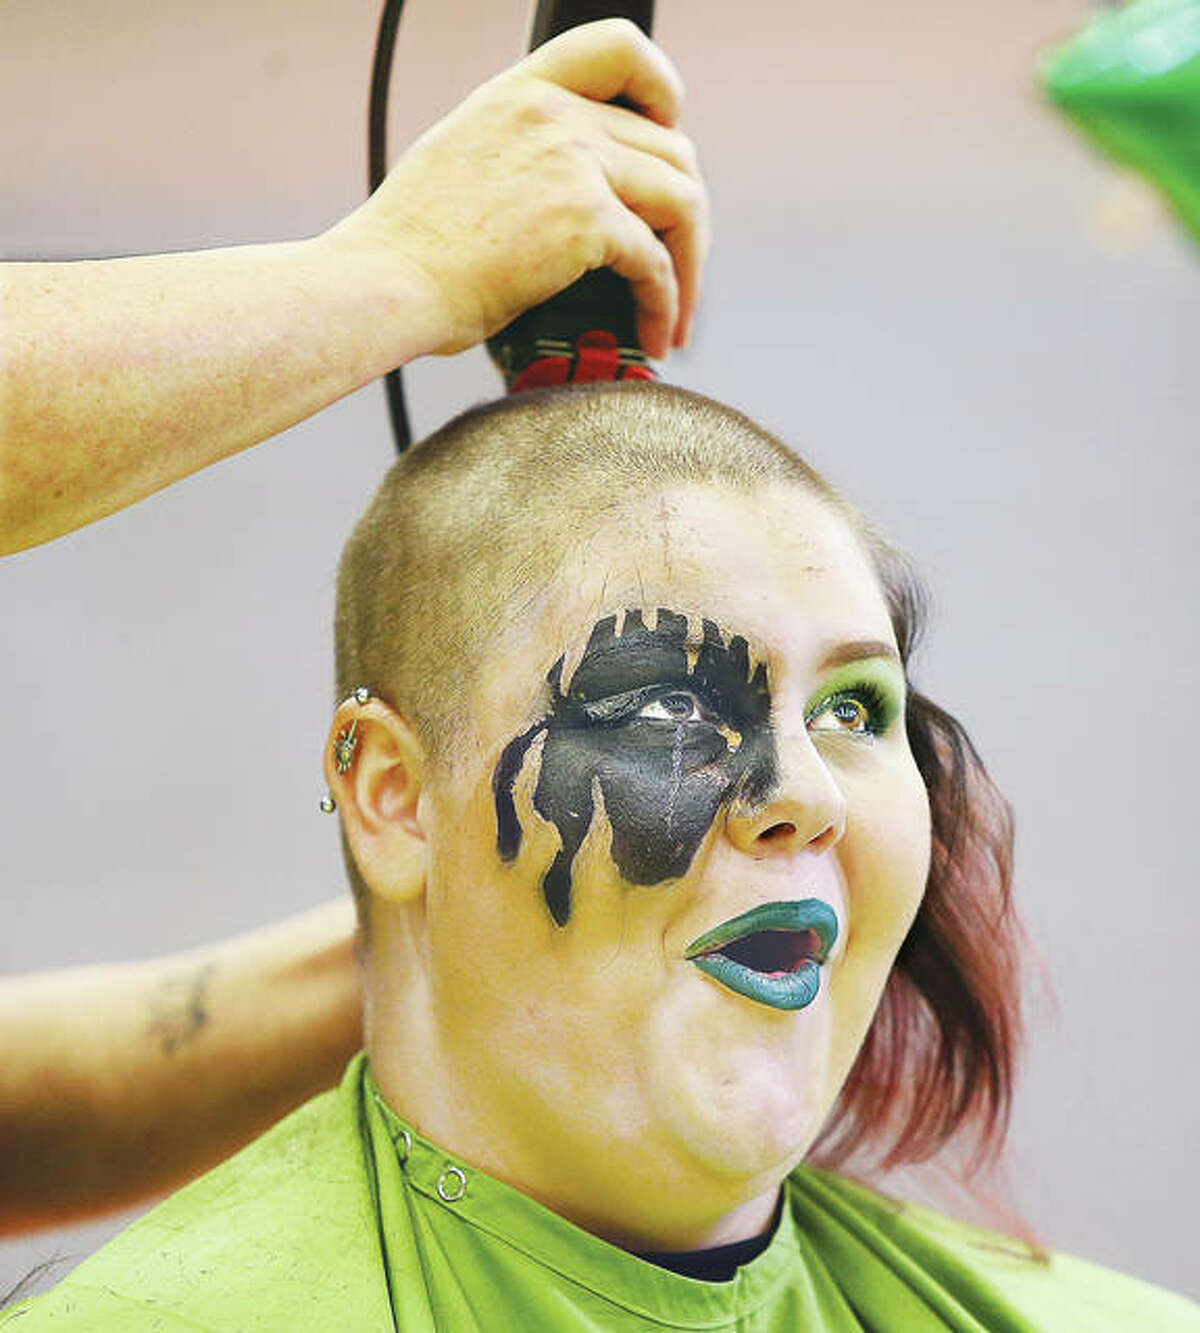 Alton High School senior Harmony Schallenberg reacts Wednesday at the school as her head is shaved during the school’s 10th annual St. Baldrick’s Foundation fundraiser for childhood cancer research. About 27 students participated this year, raising $11,000 for the charity. One student alone raised $3,100 for the cause. Students and parents gathered to watch the annual ritual in the school gymnasium. Over the past decade, Alton High School has raised more than $90,000 for cancer research. Additional photos in a slideshow at thetelegraph.com.